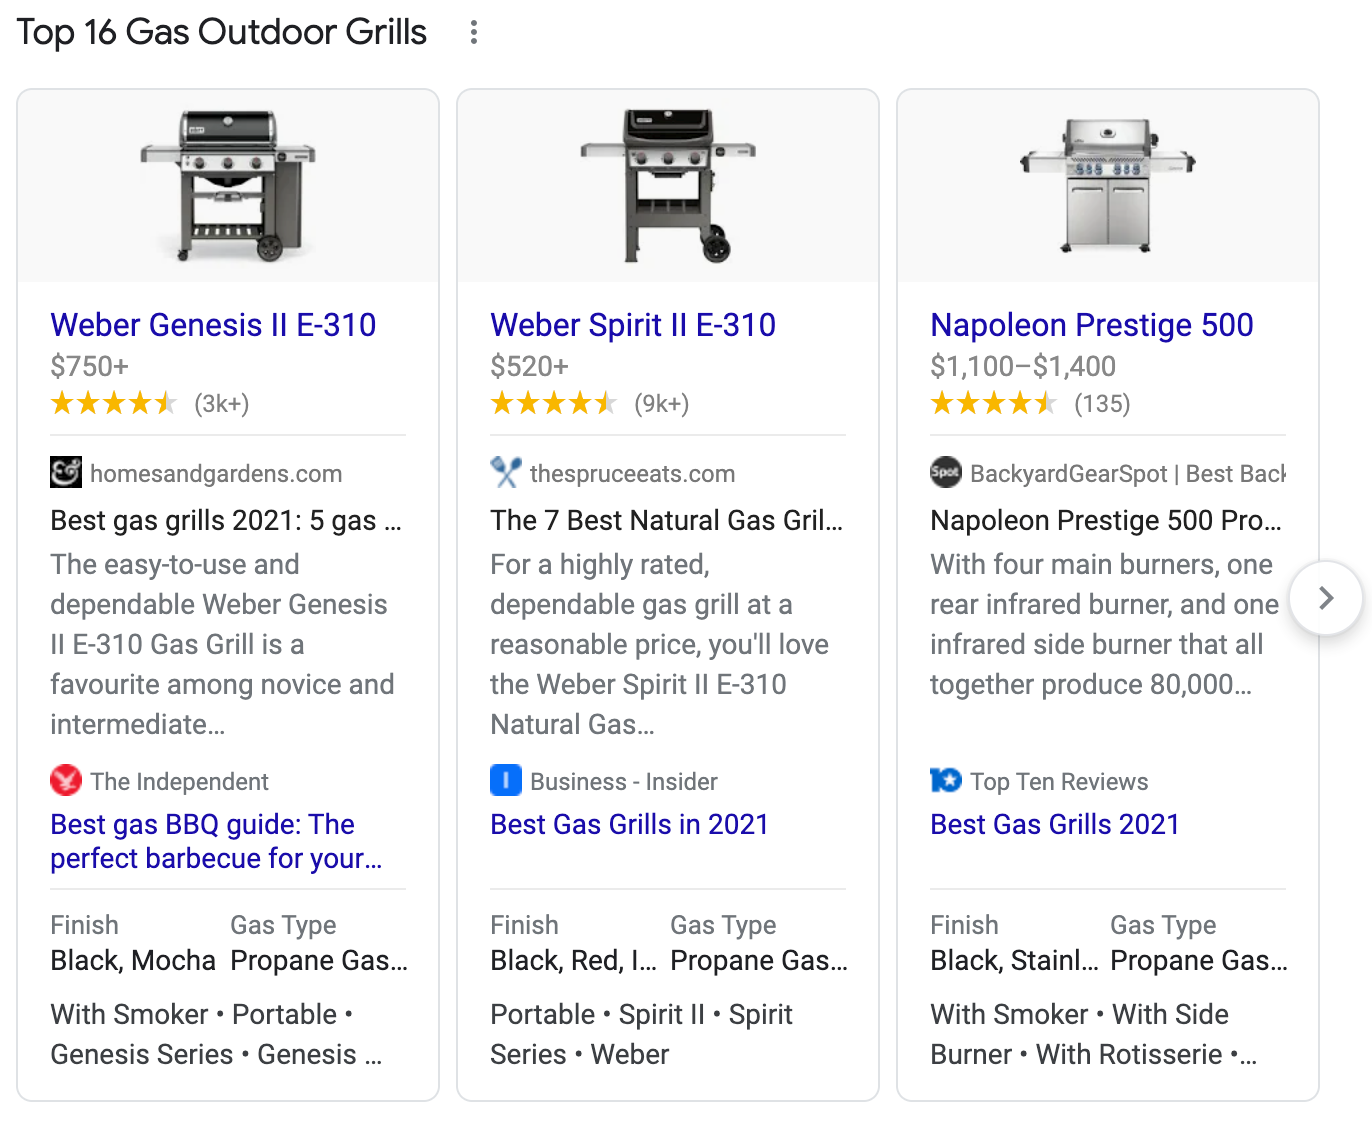 Top Products Carousel example on gas outdoor grills.